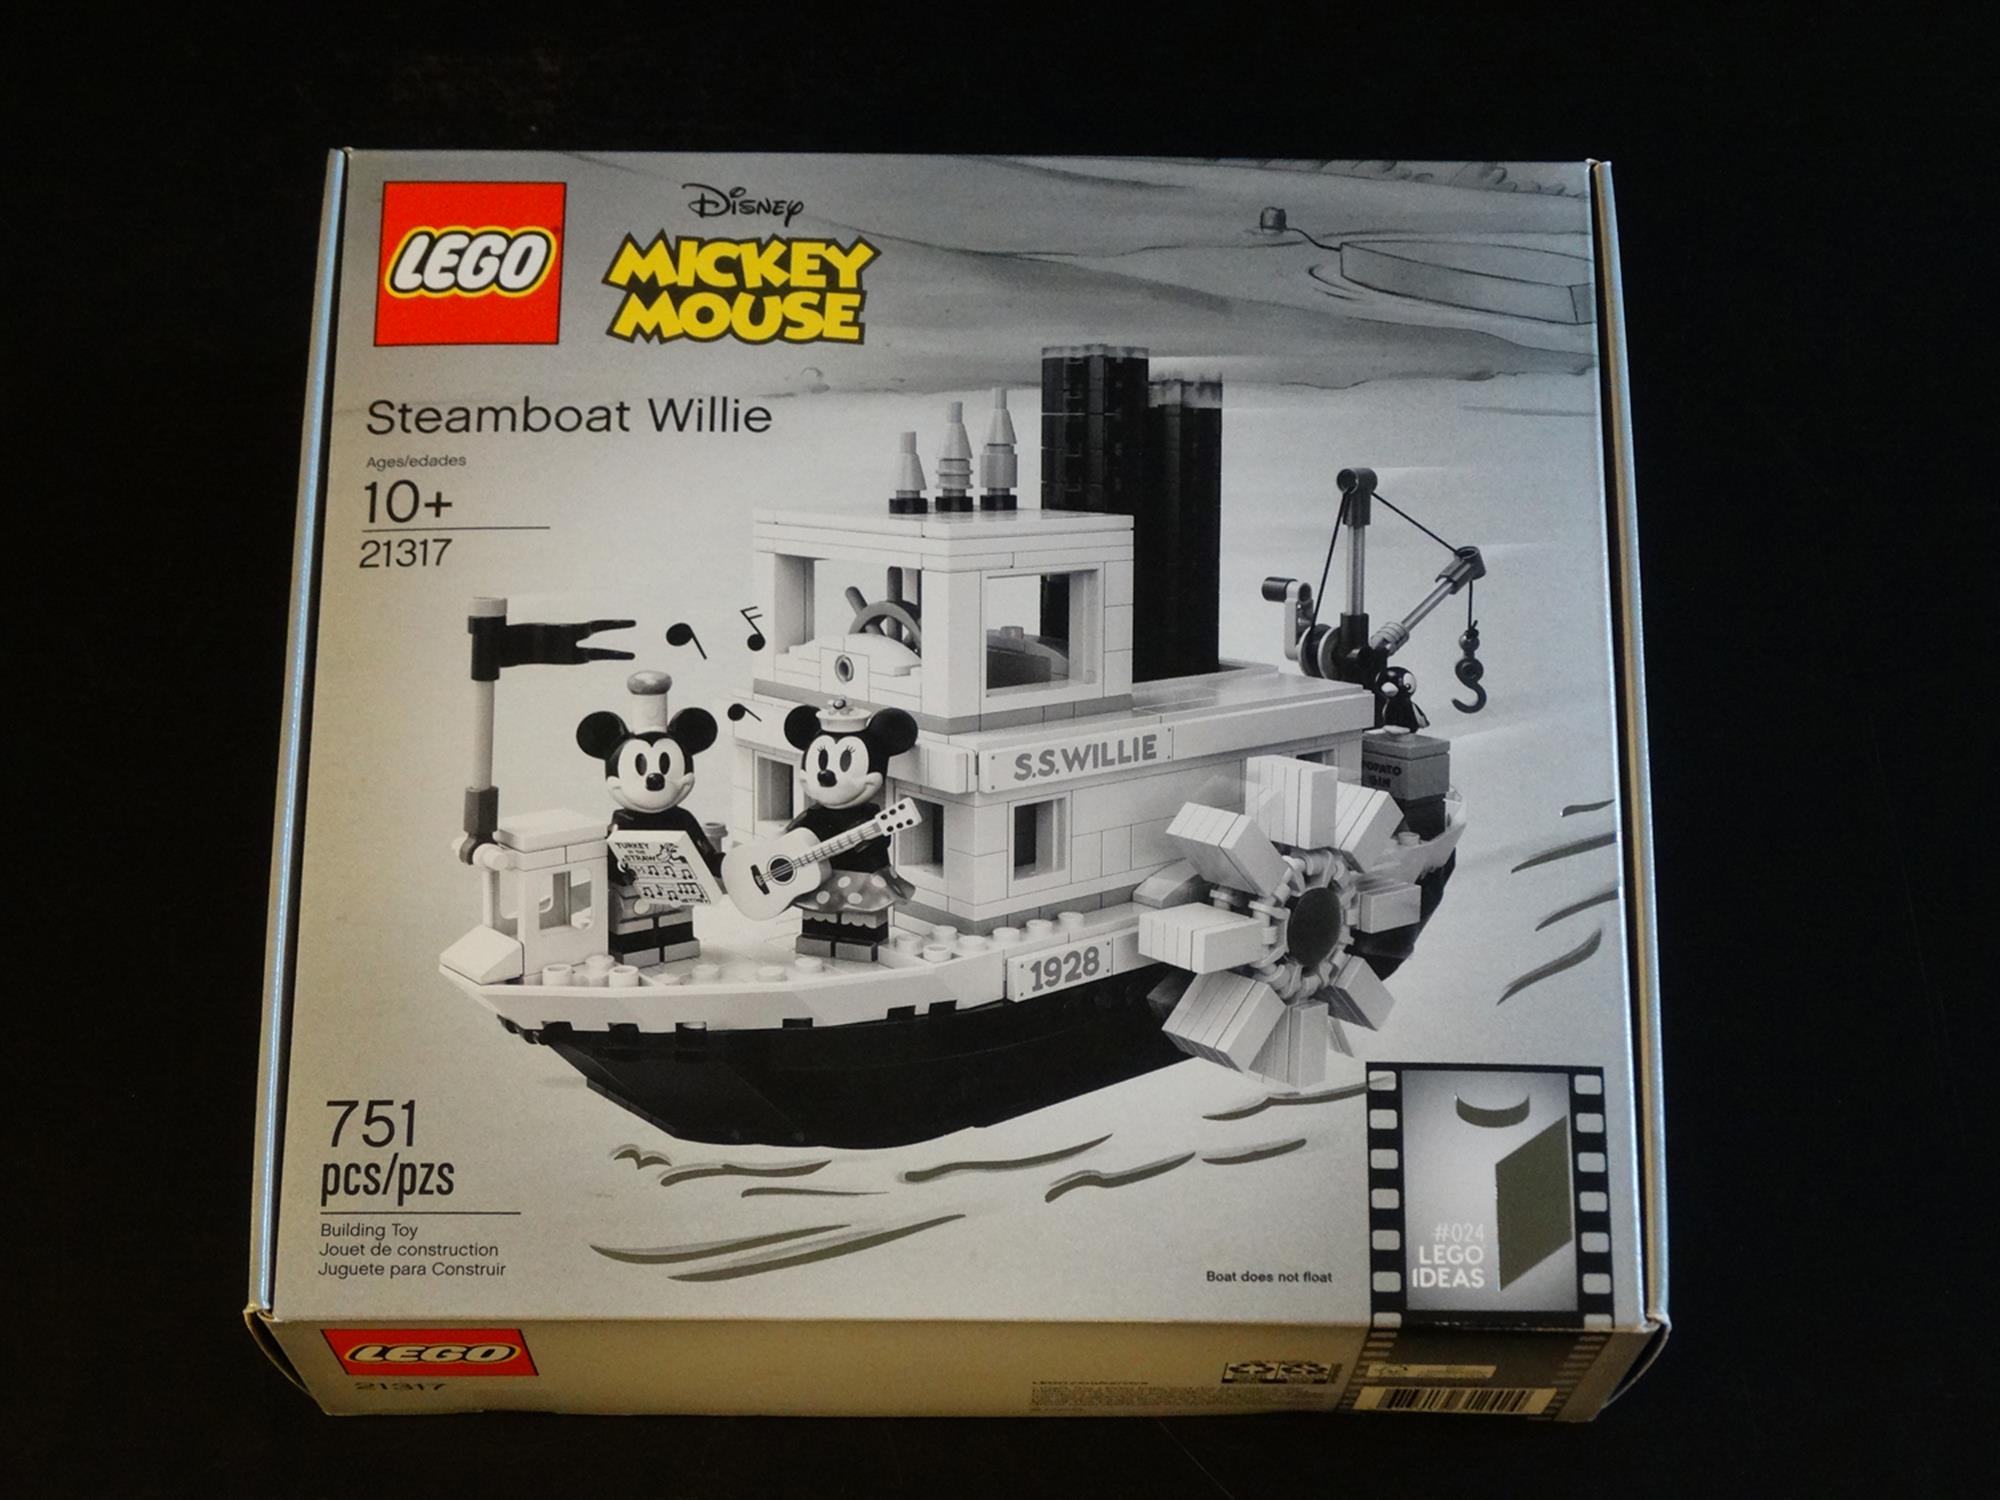 Disney Steamboat Willie 21317 New 2019 Ideas Mickey Mouse Set 751pcs 